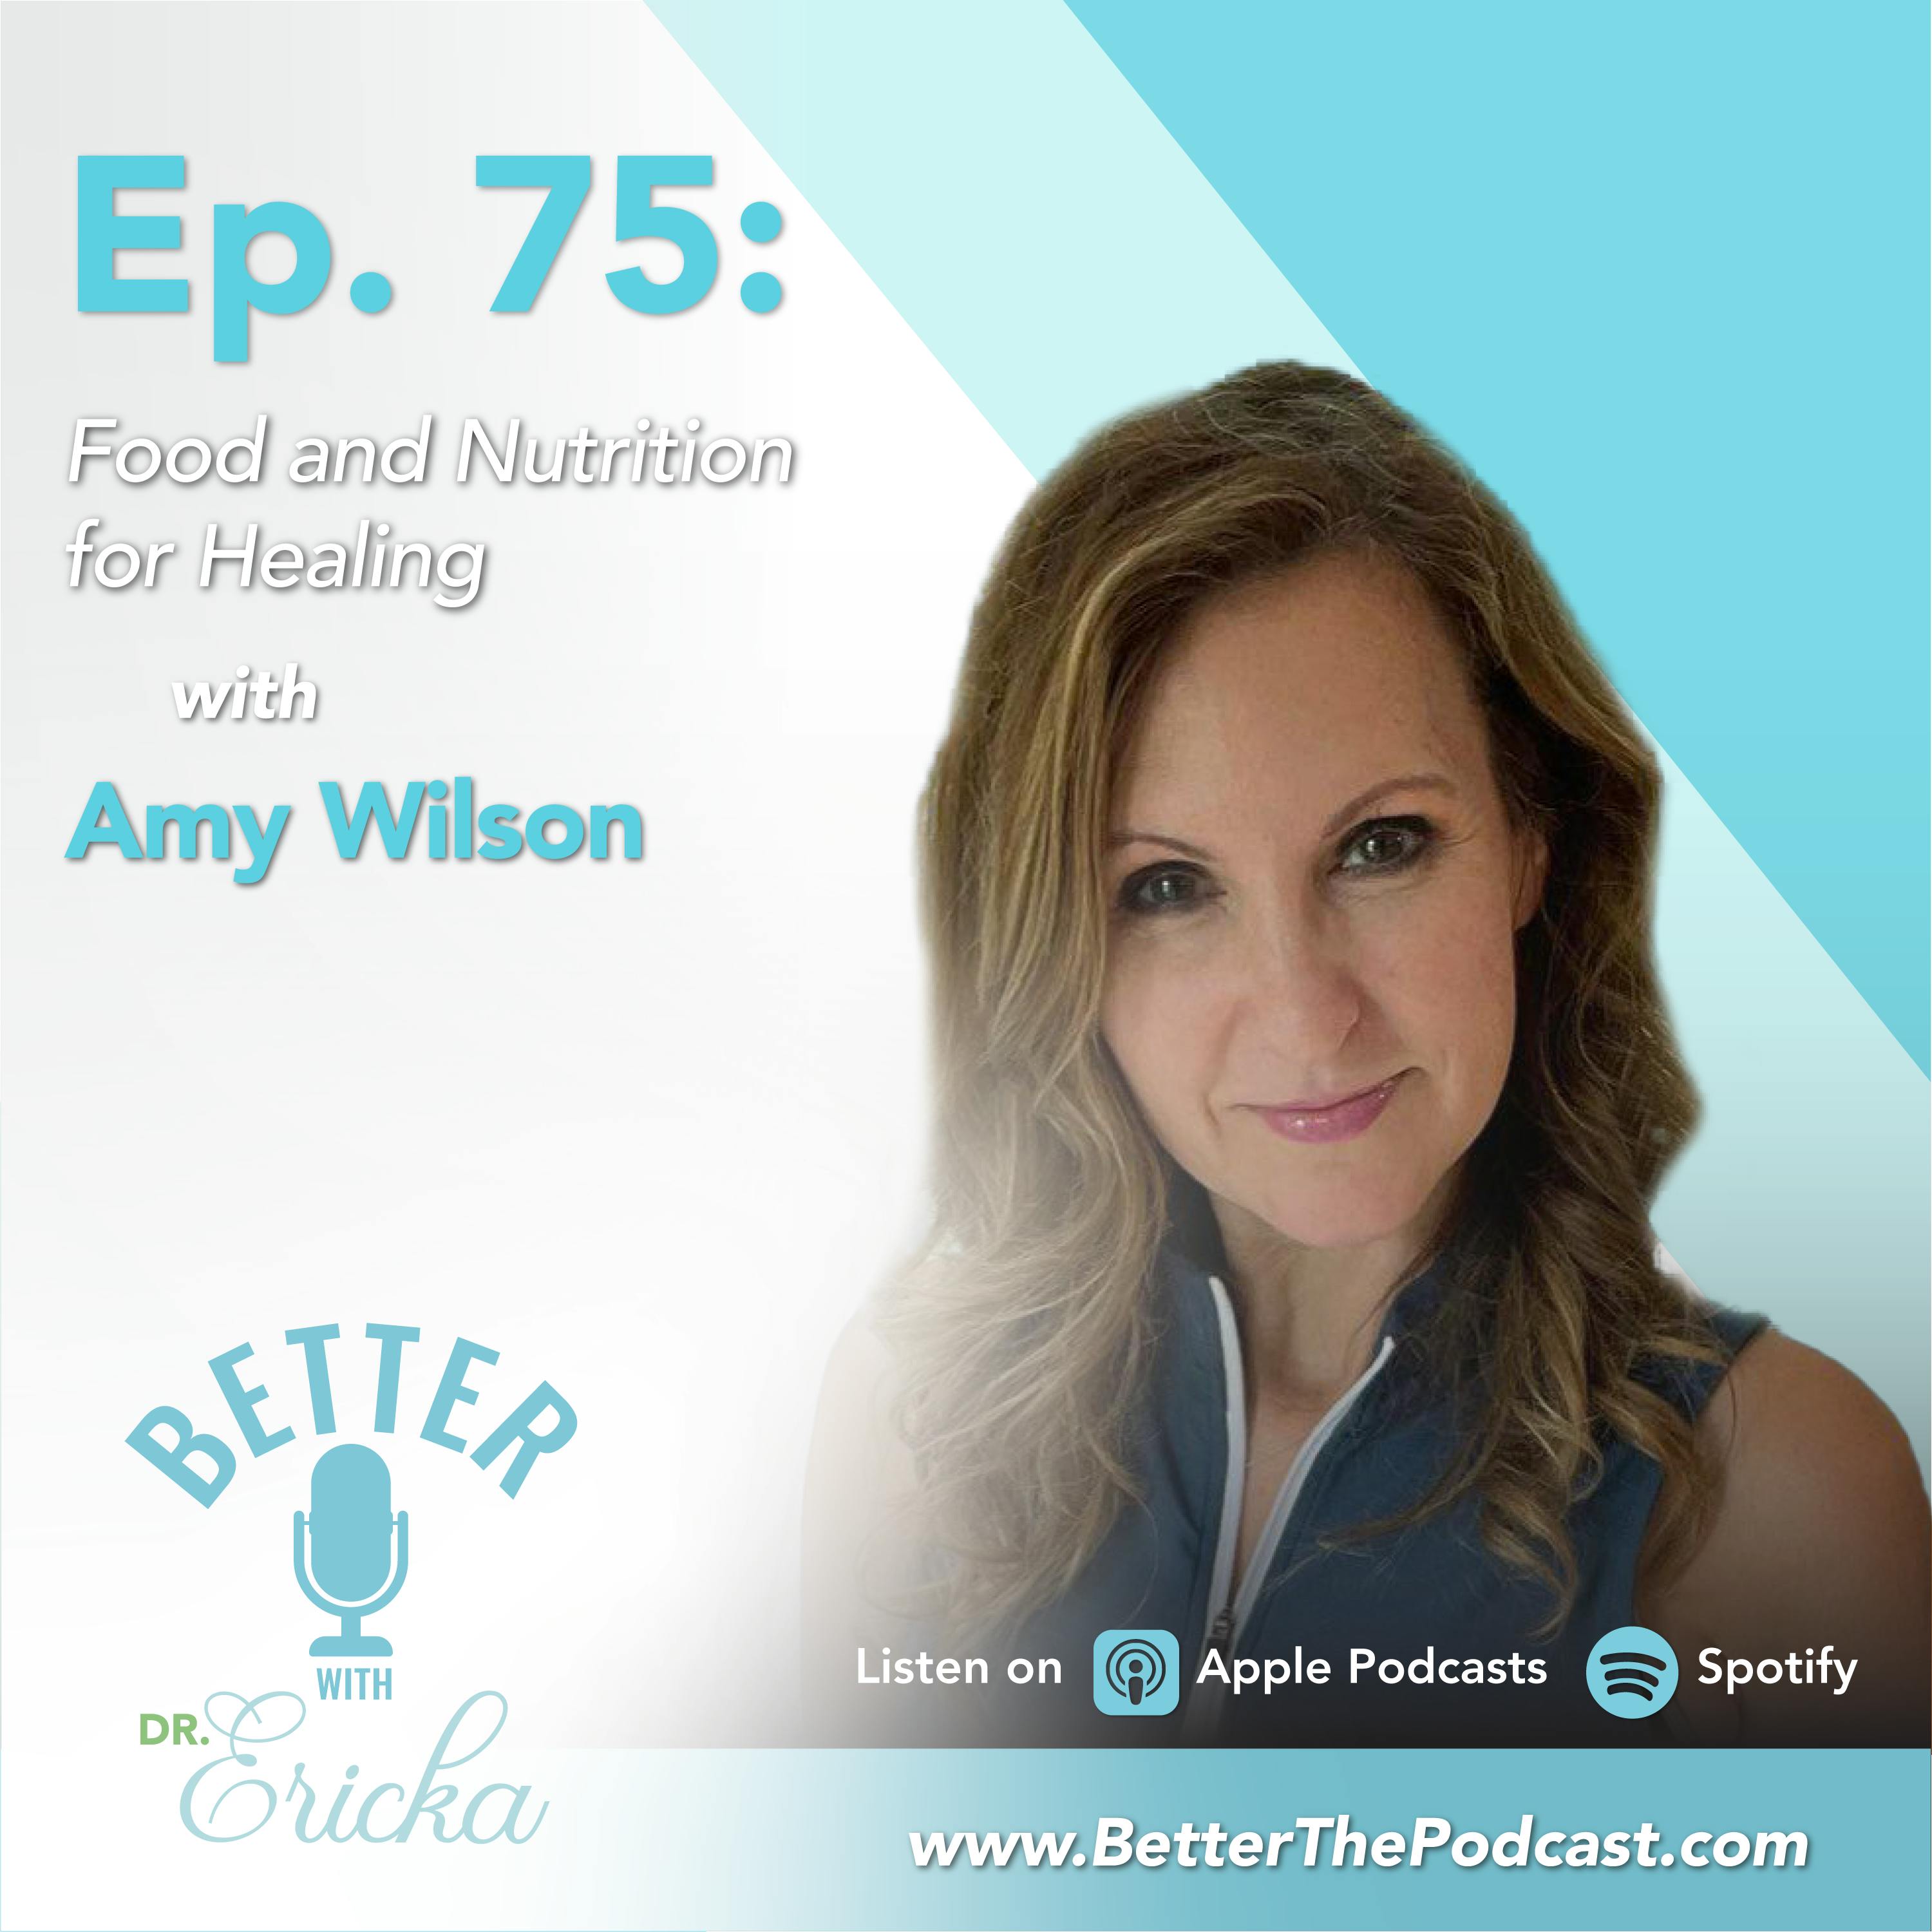 Food and Nutrition for Healing with Amy Wilson